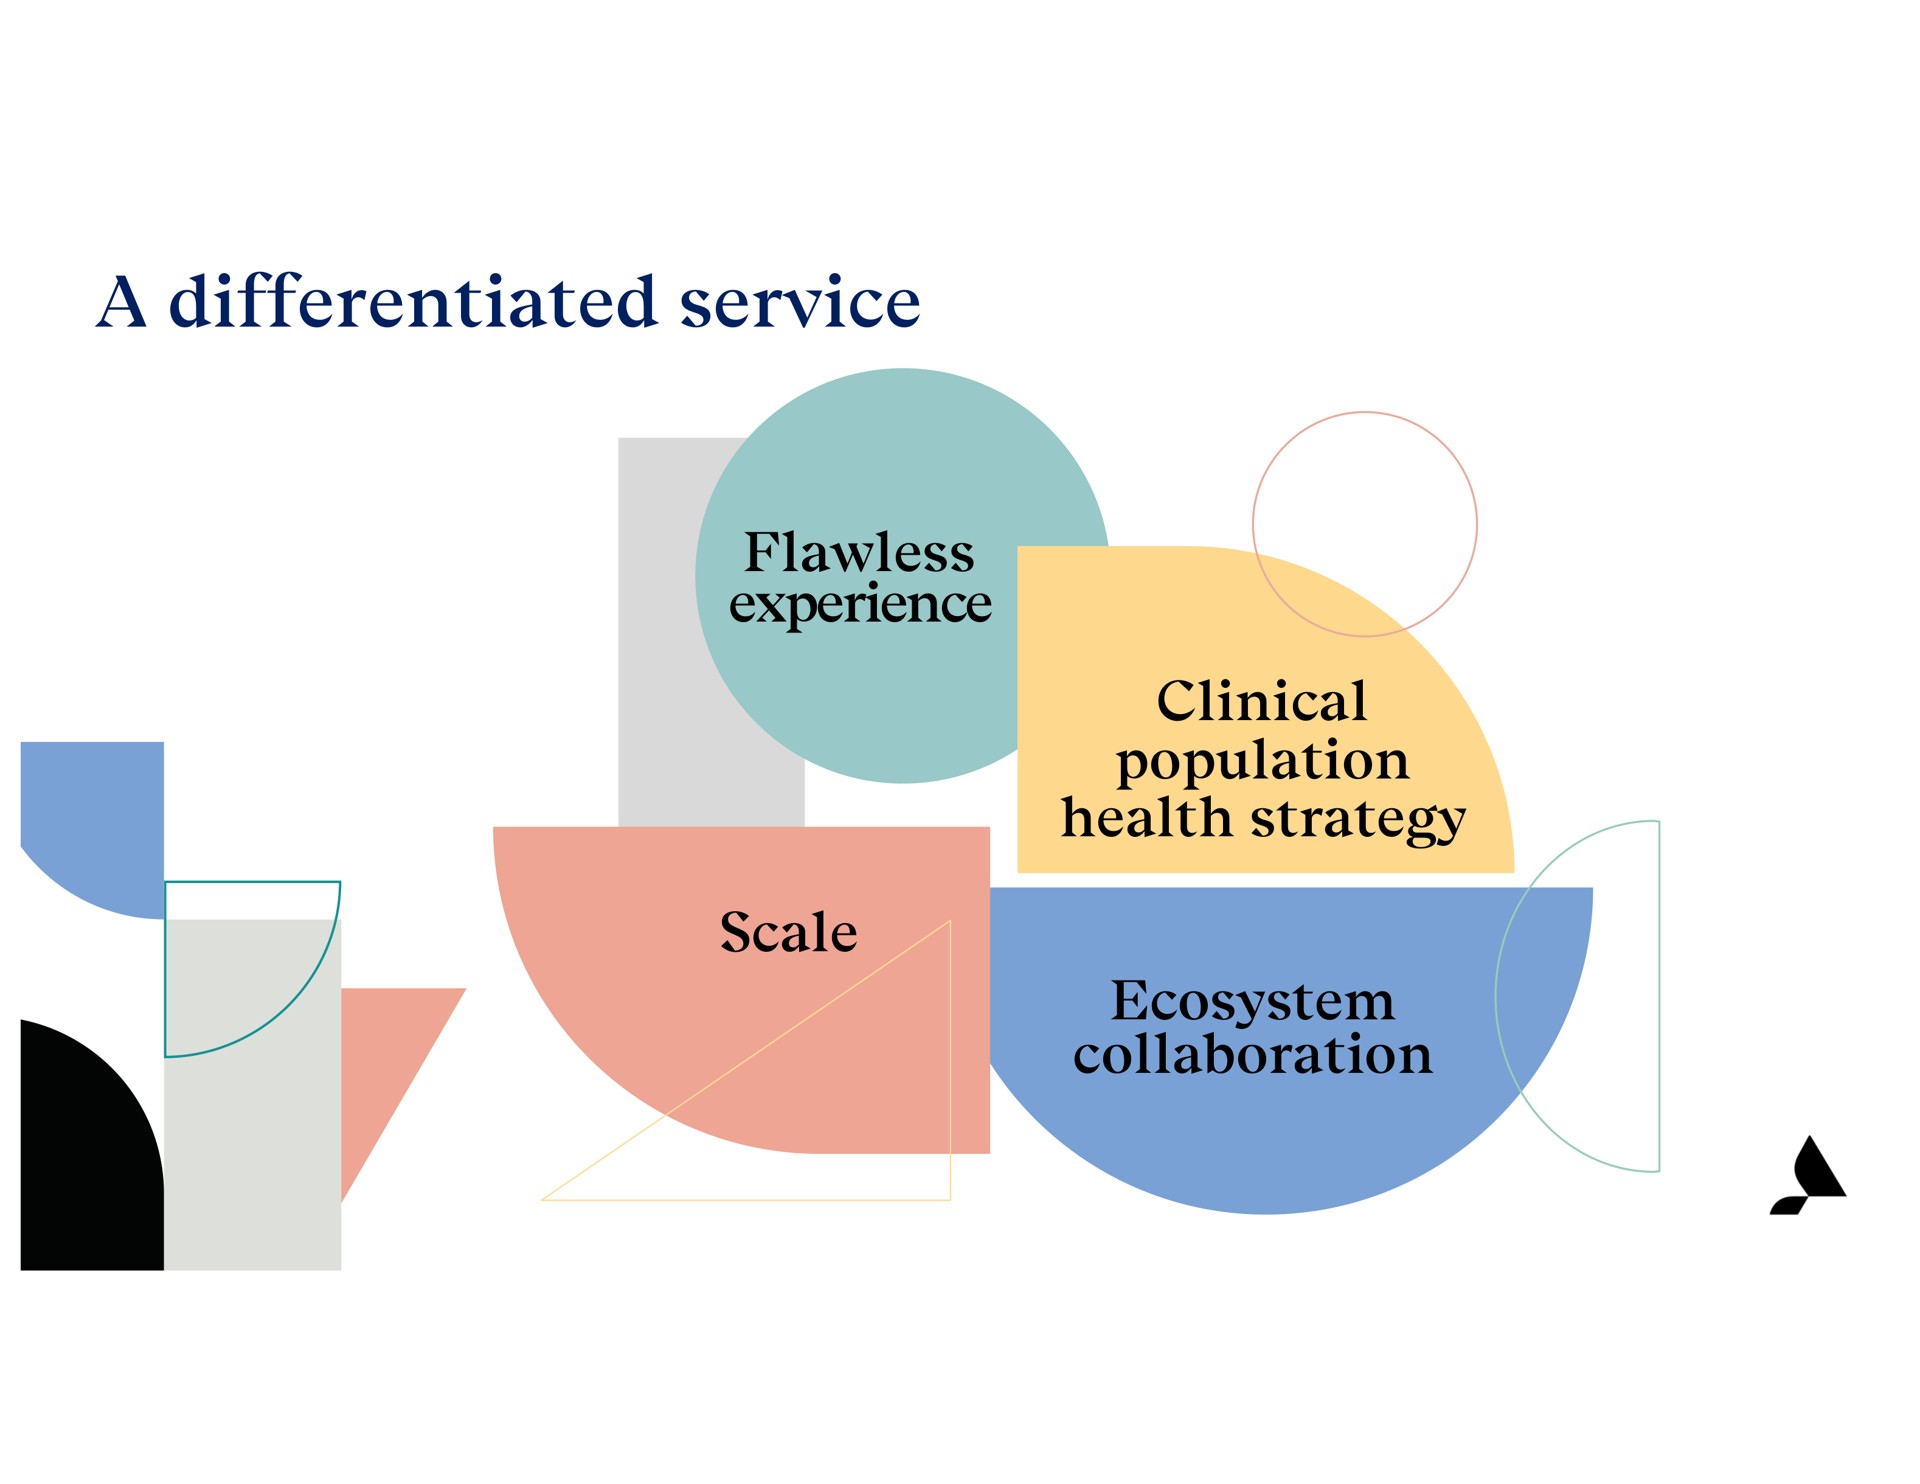 a differentiated service flawless experience scale clinical population health strategy ecosystem collaboration | Accolade